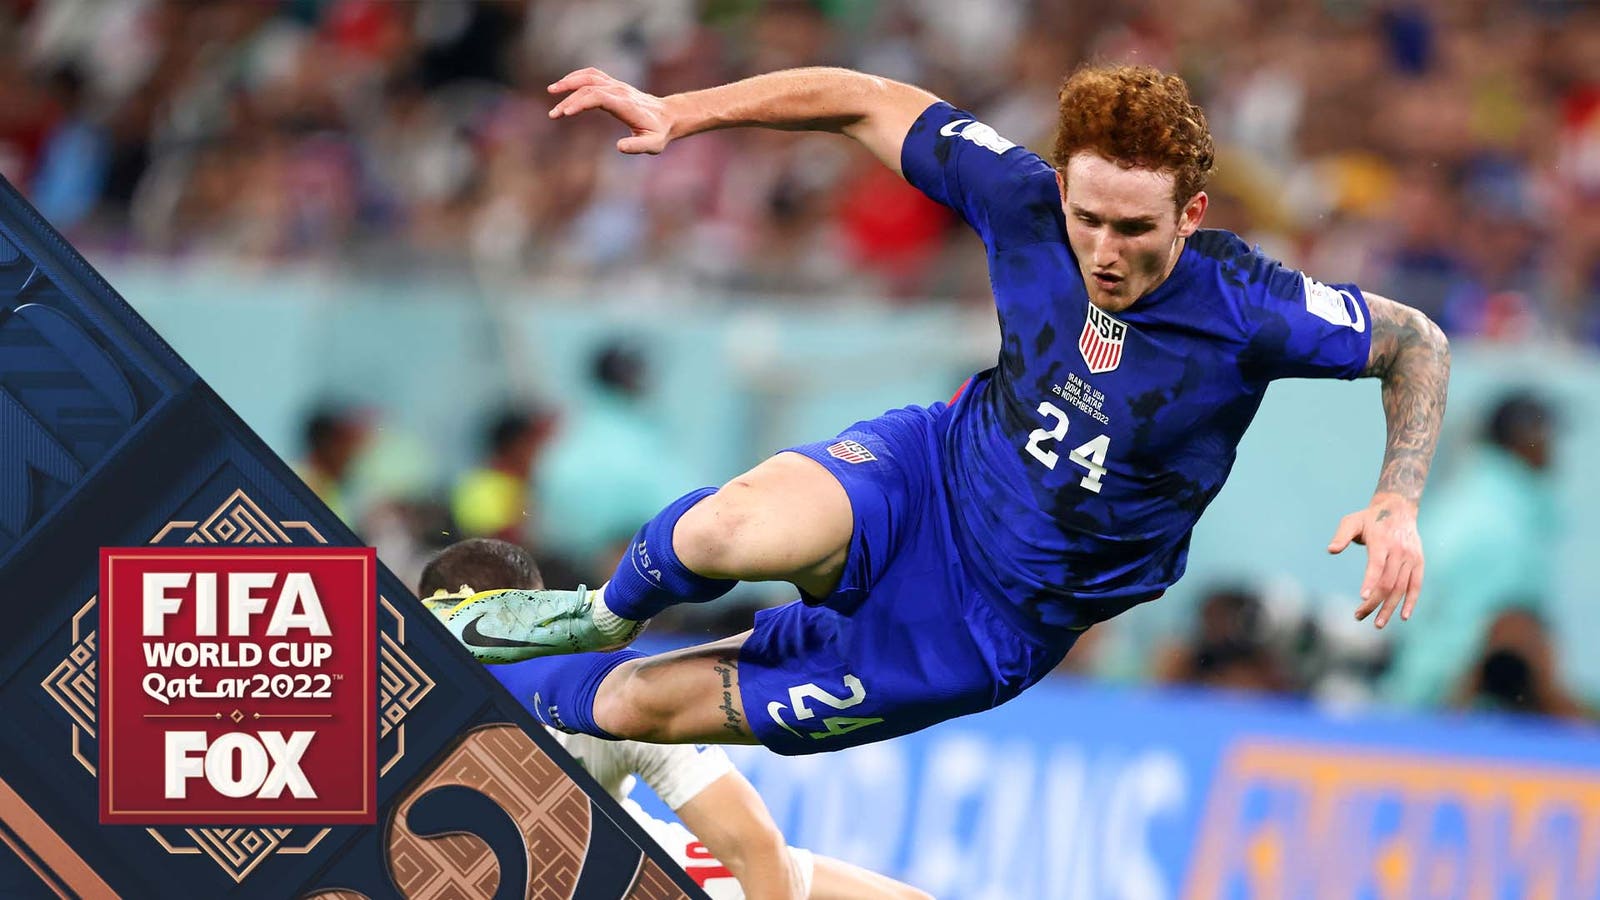 Dr. Matt Provencher gives his prognosis for USMNT's Josh Sargent after suffering an ankle injury in the United States' 1-0 win over Iran.